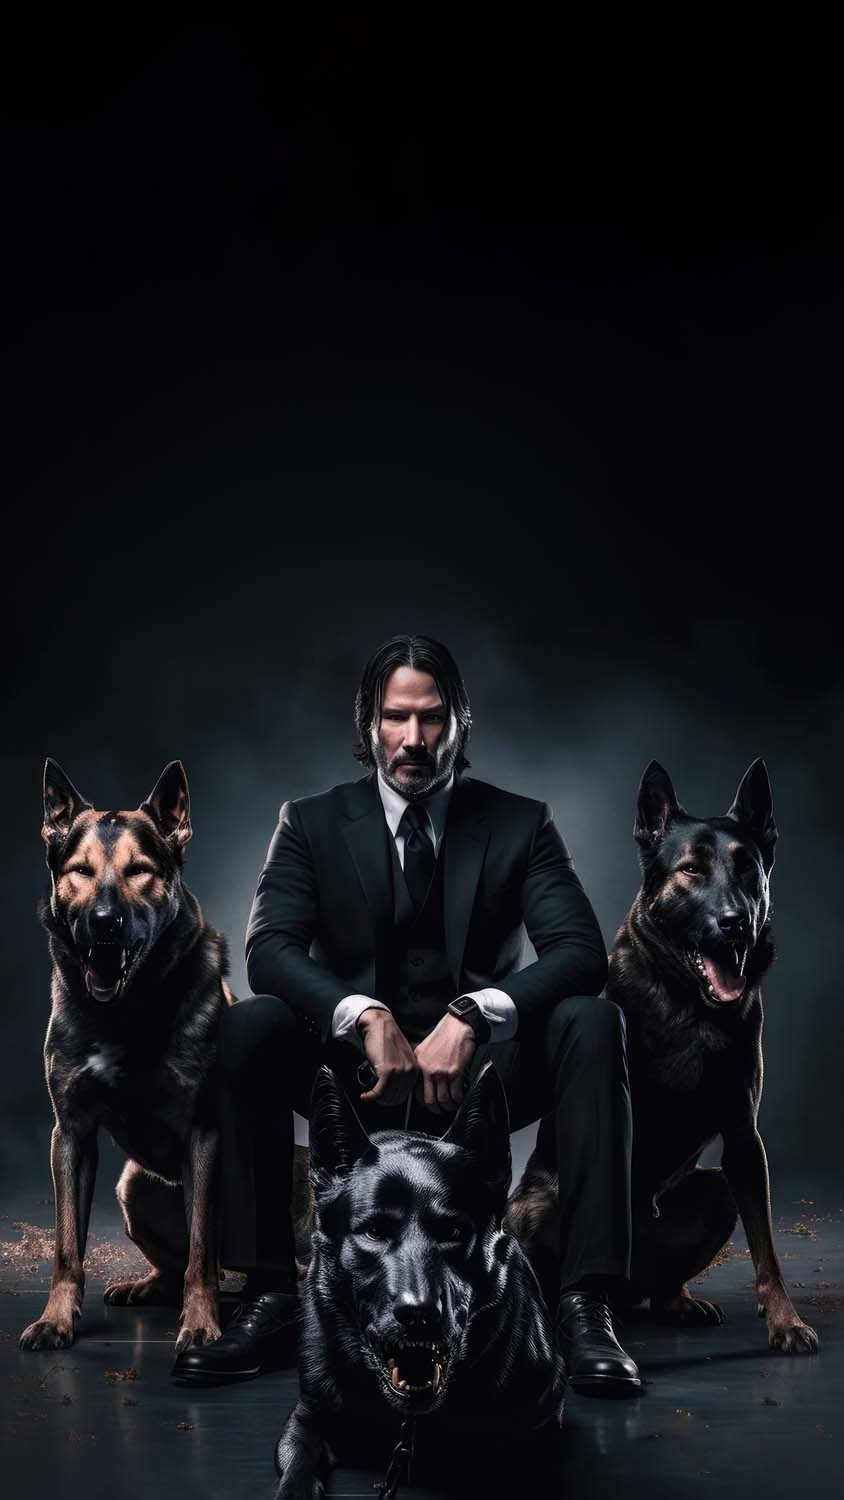 John Wick With Dogs